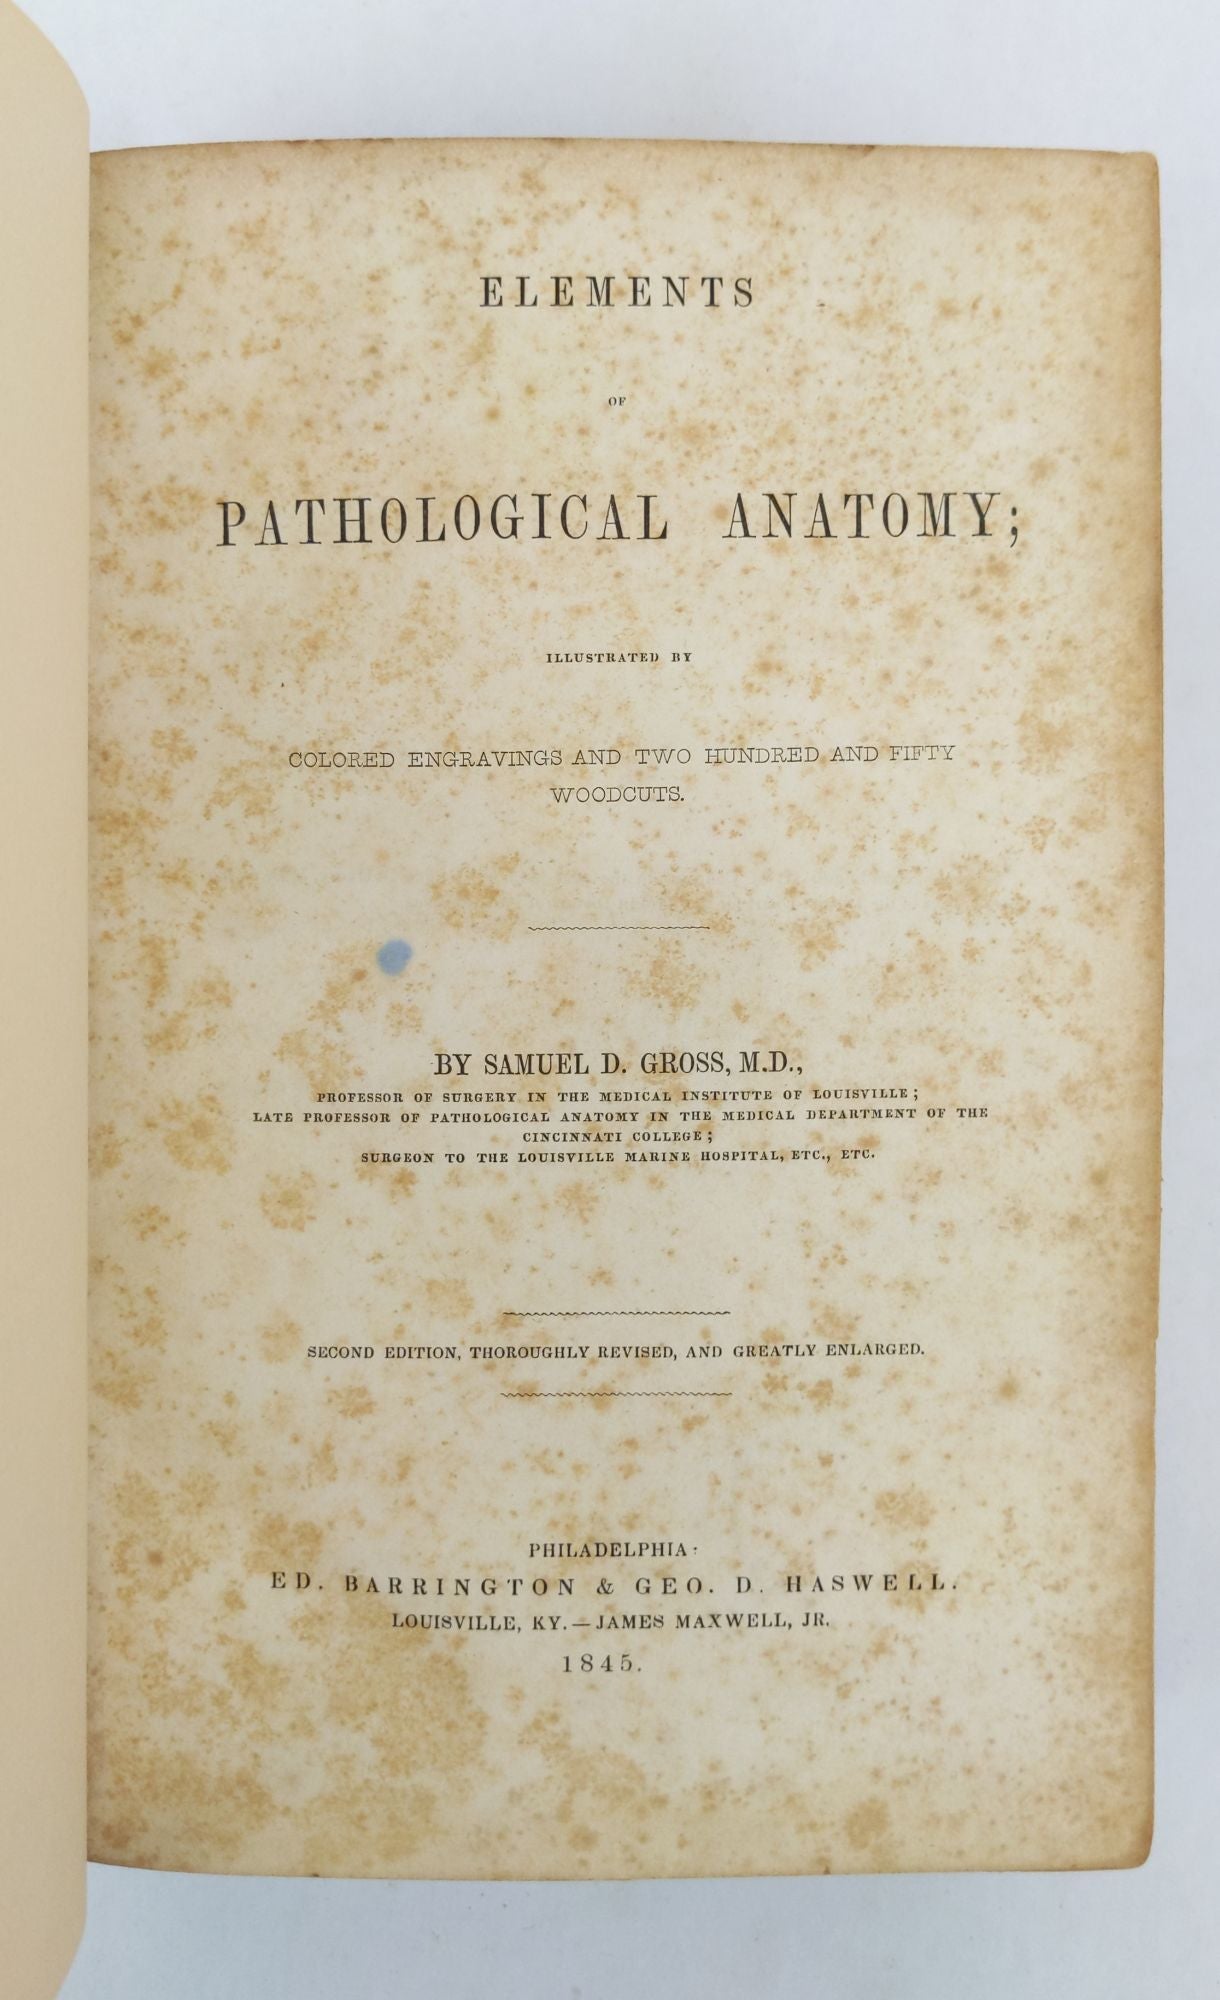 Product Image for ELEMENTS OF PATHOLOGICAL ANATOMY; ILLUSTRATED BY COLORED ENGRAVINGS AND TWO HUNDRED FIFTY WOODCUTS